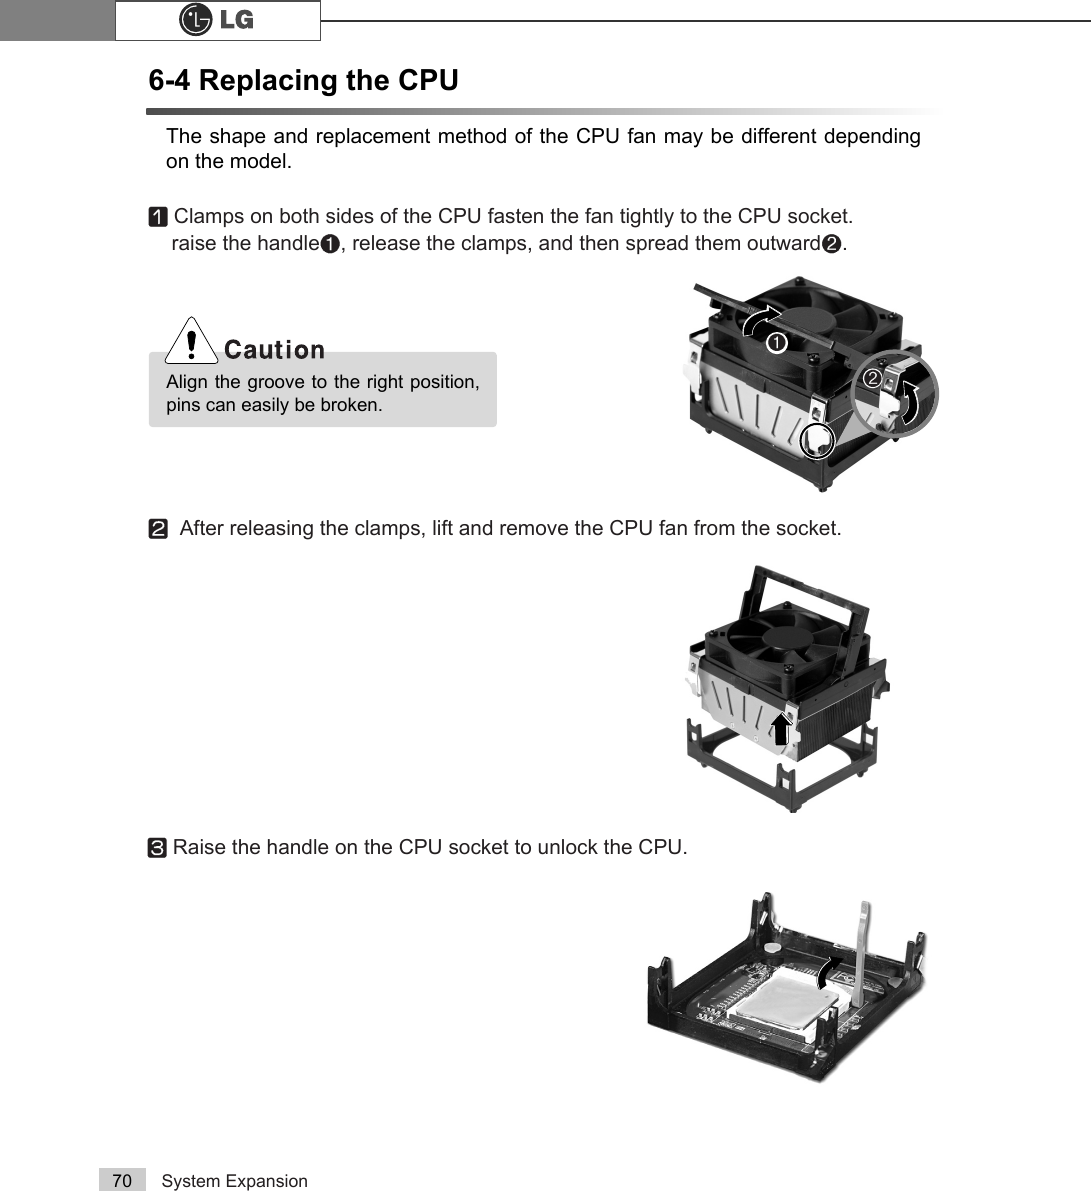 System Expansion706-4 Replacing the CPUThe shape and replacement method of the CPU fan may be different dependingon the model.ⓞClamps on both sides of the CPU fasten the fan tightly to the CPU socket. raise the handle℘, release the clamps, and then spread them outwardℙ.ⓟAfter releasing the clamps, lift and remove the CPU fan from the socket.ⓠRaise the handle on the CPU socket to unlock the CPU.℘ℙAlign the groove to the right position,pins can easily be broken.